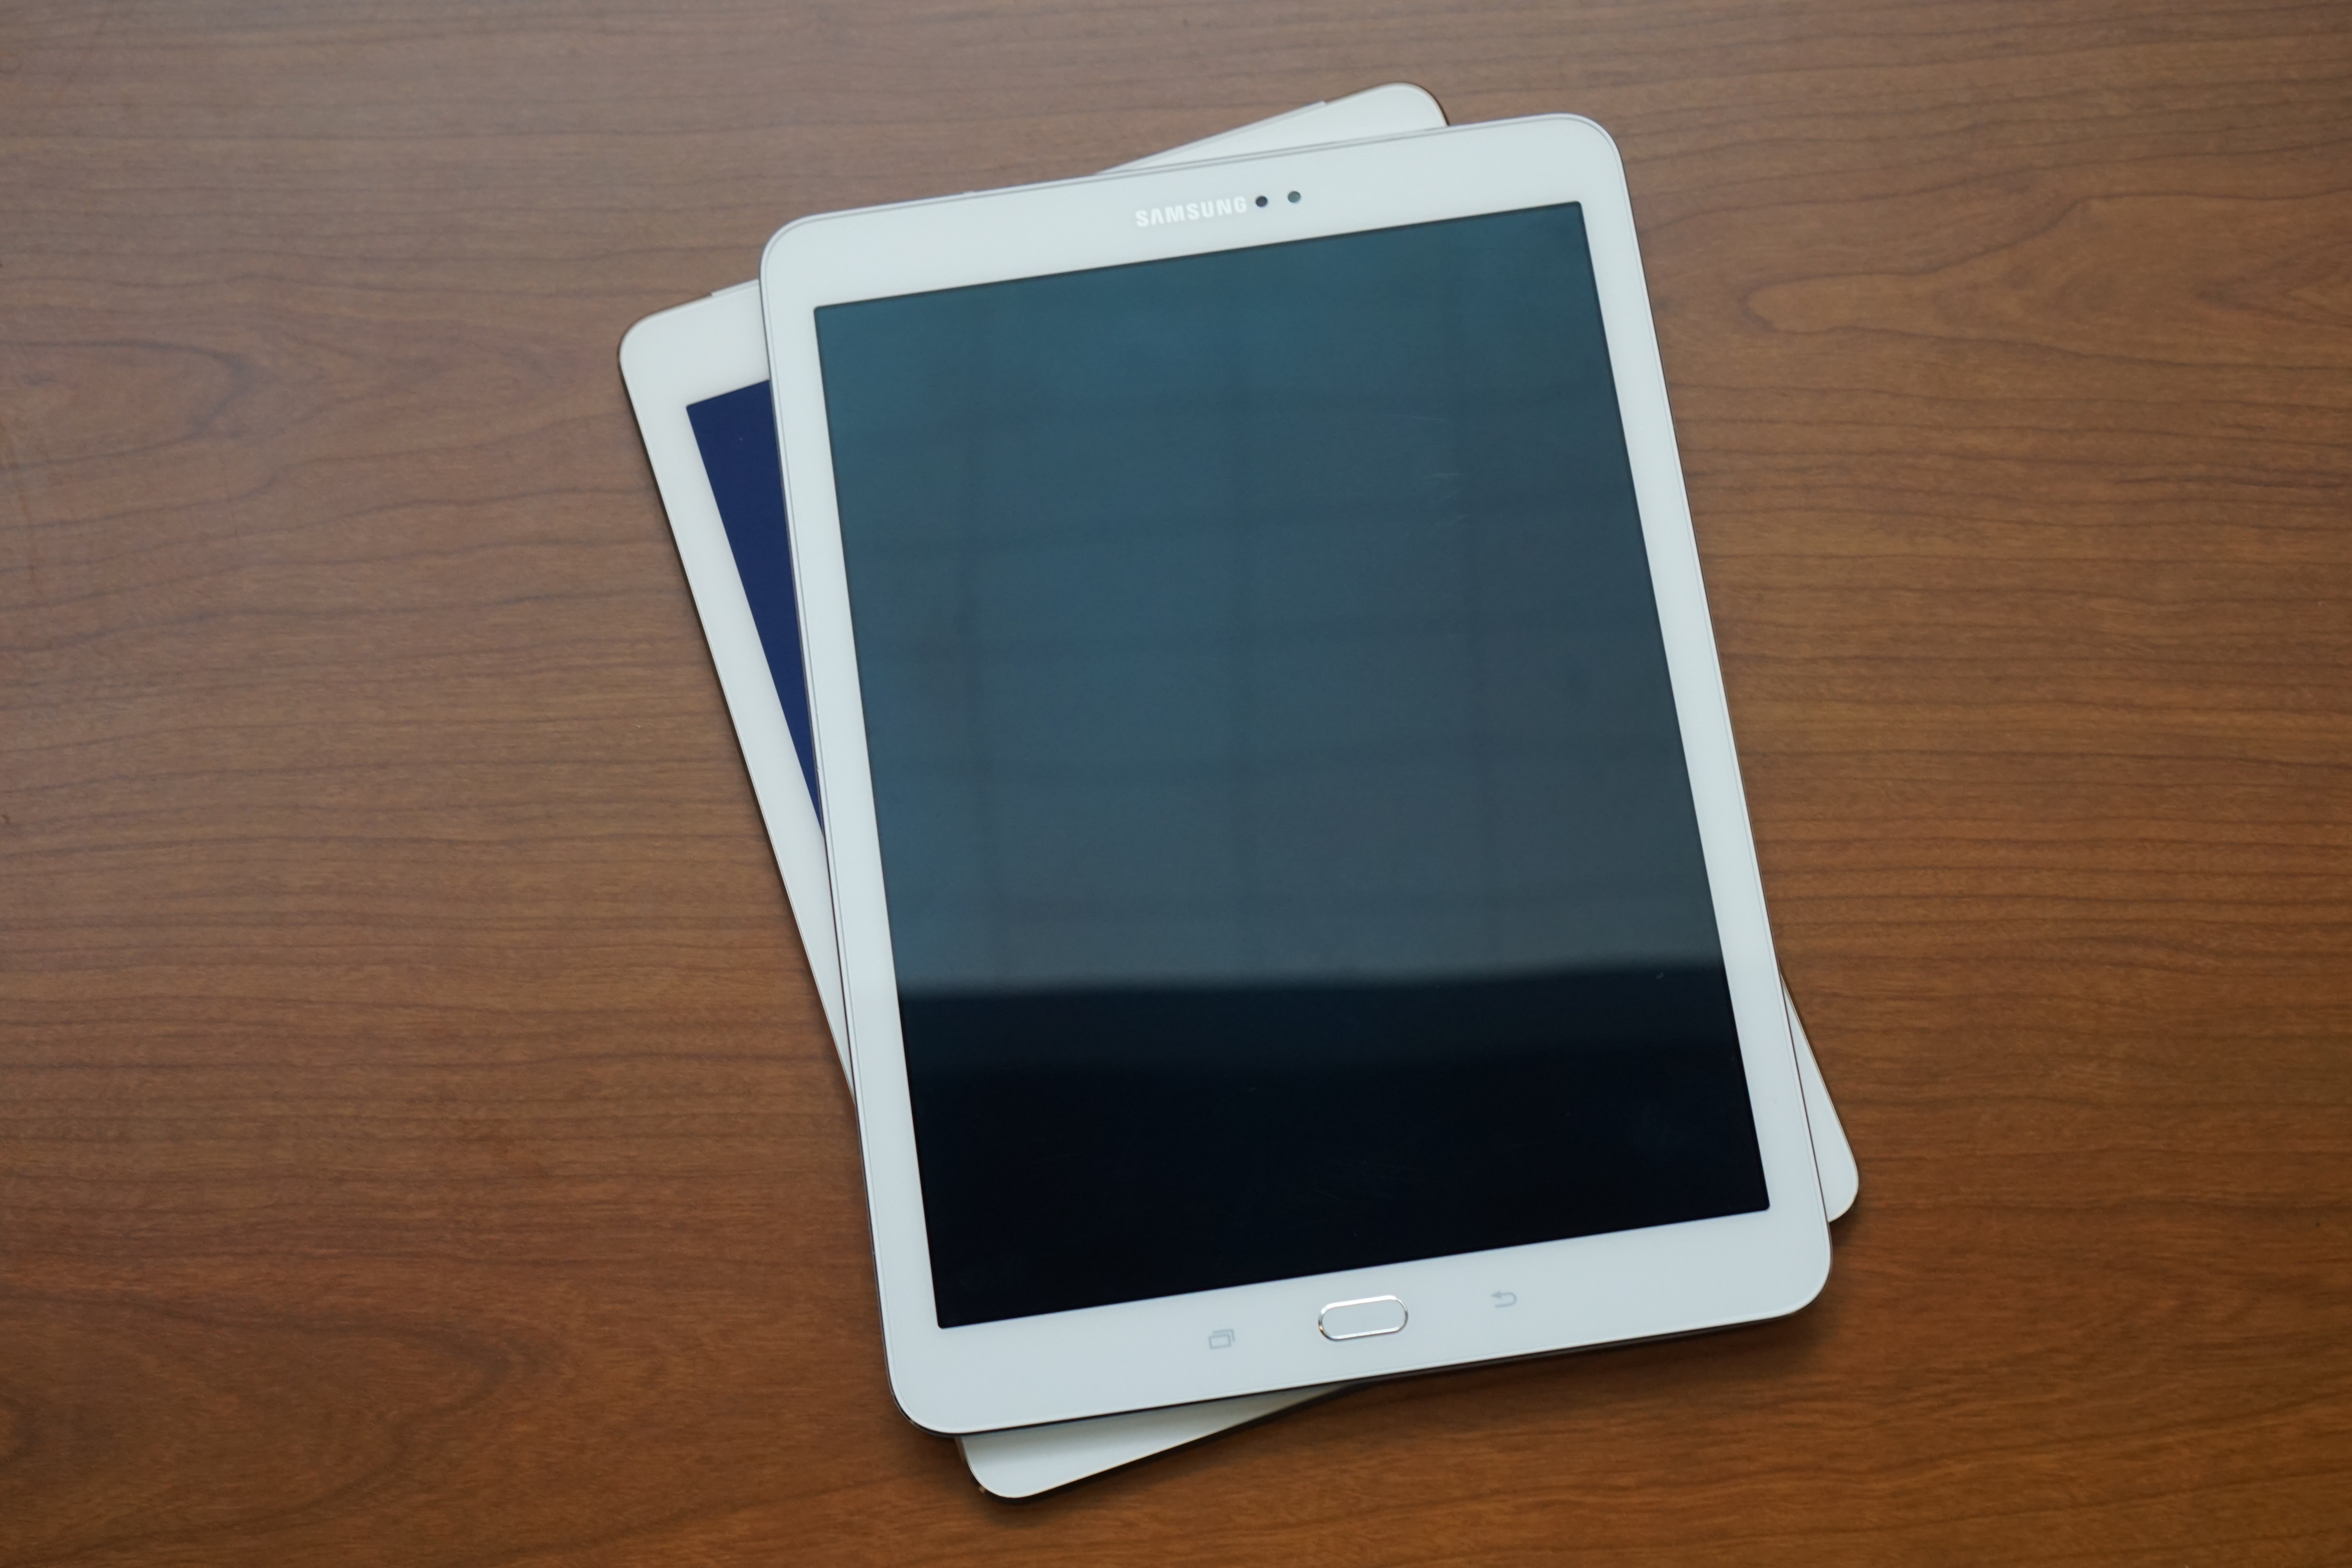 Final Words - The Samsung Tab S2 Review